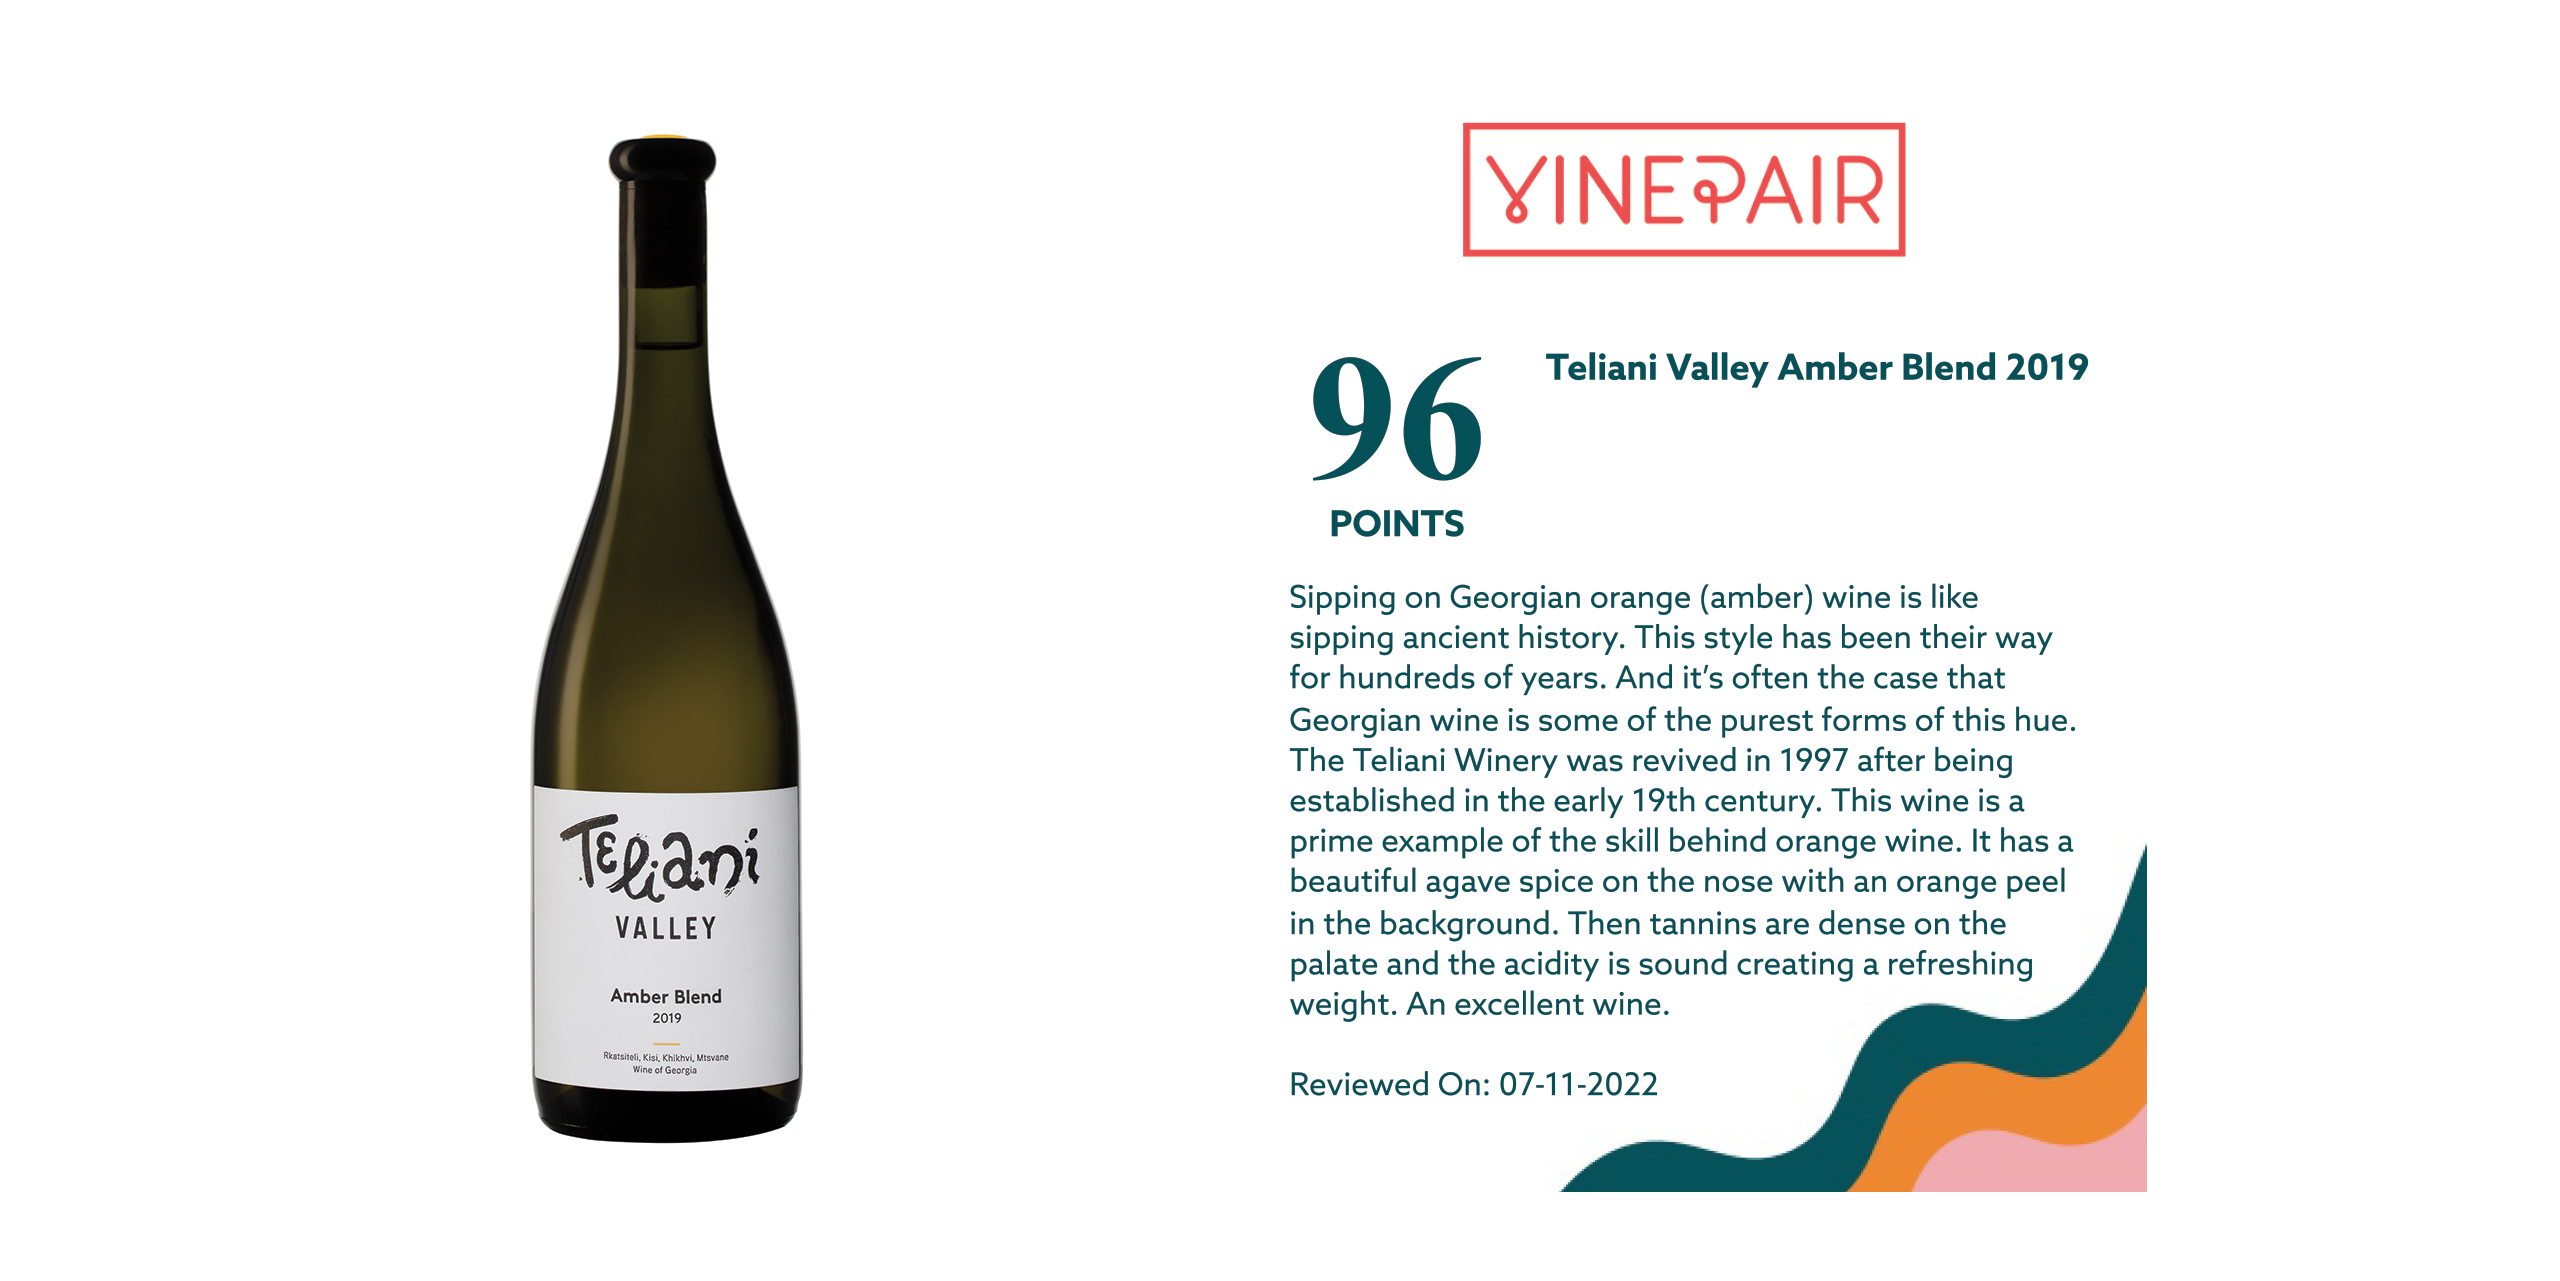 Teliani Valley Amber Blend 2019 tops the list in "The Best Orange Wines for 2022"